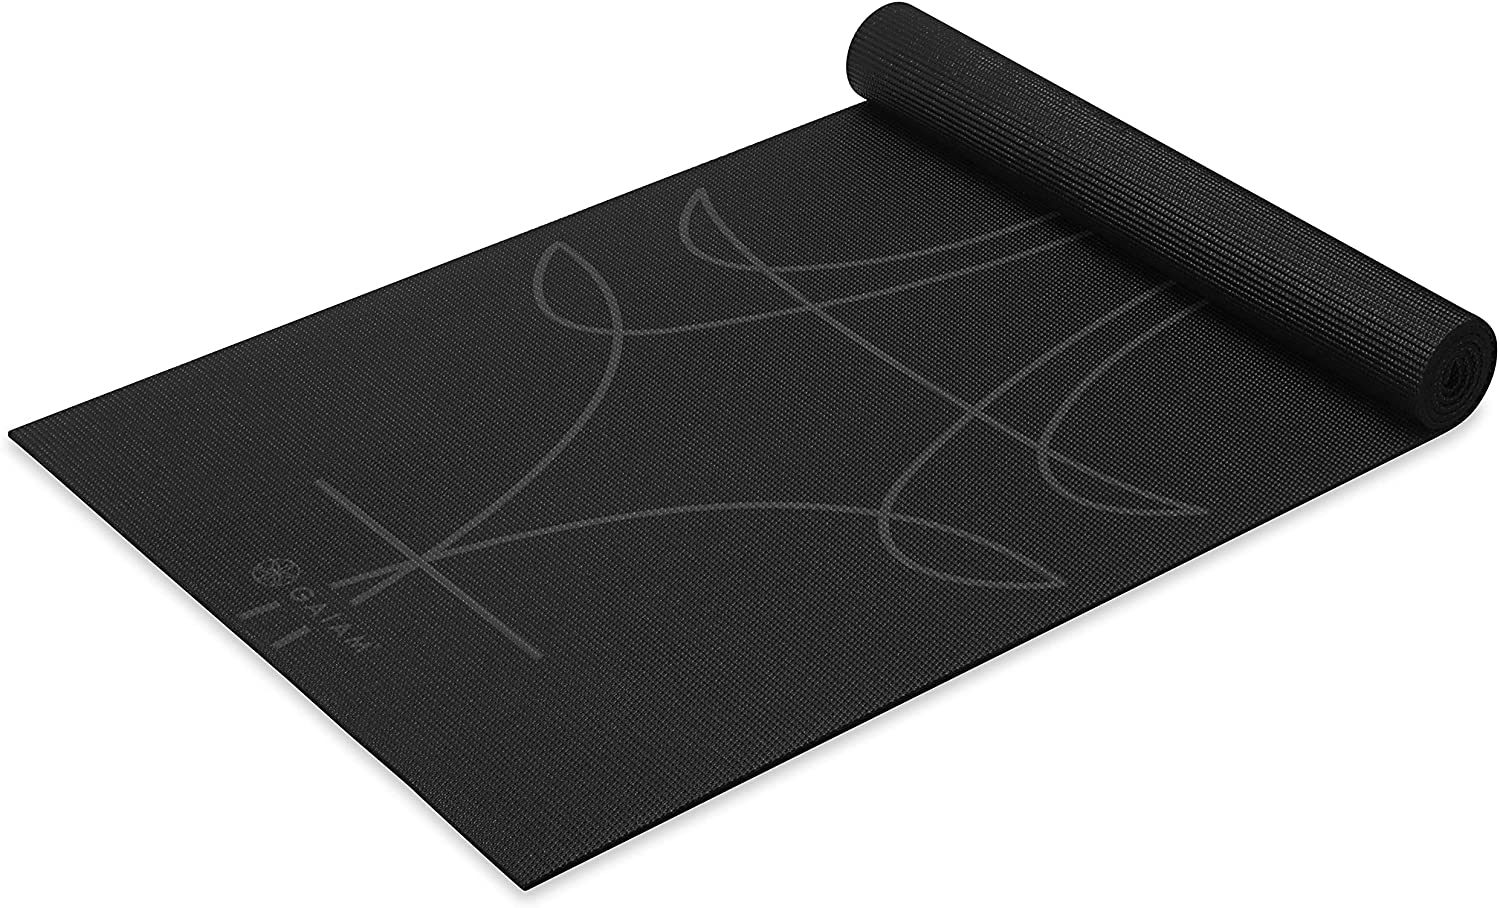 Gaiam Yoga Mat - Premium 6mm Print Extra Thick Non Slip Exercise & Fitness Mat for All Types of Yoga